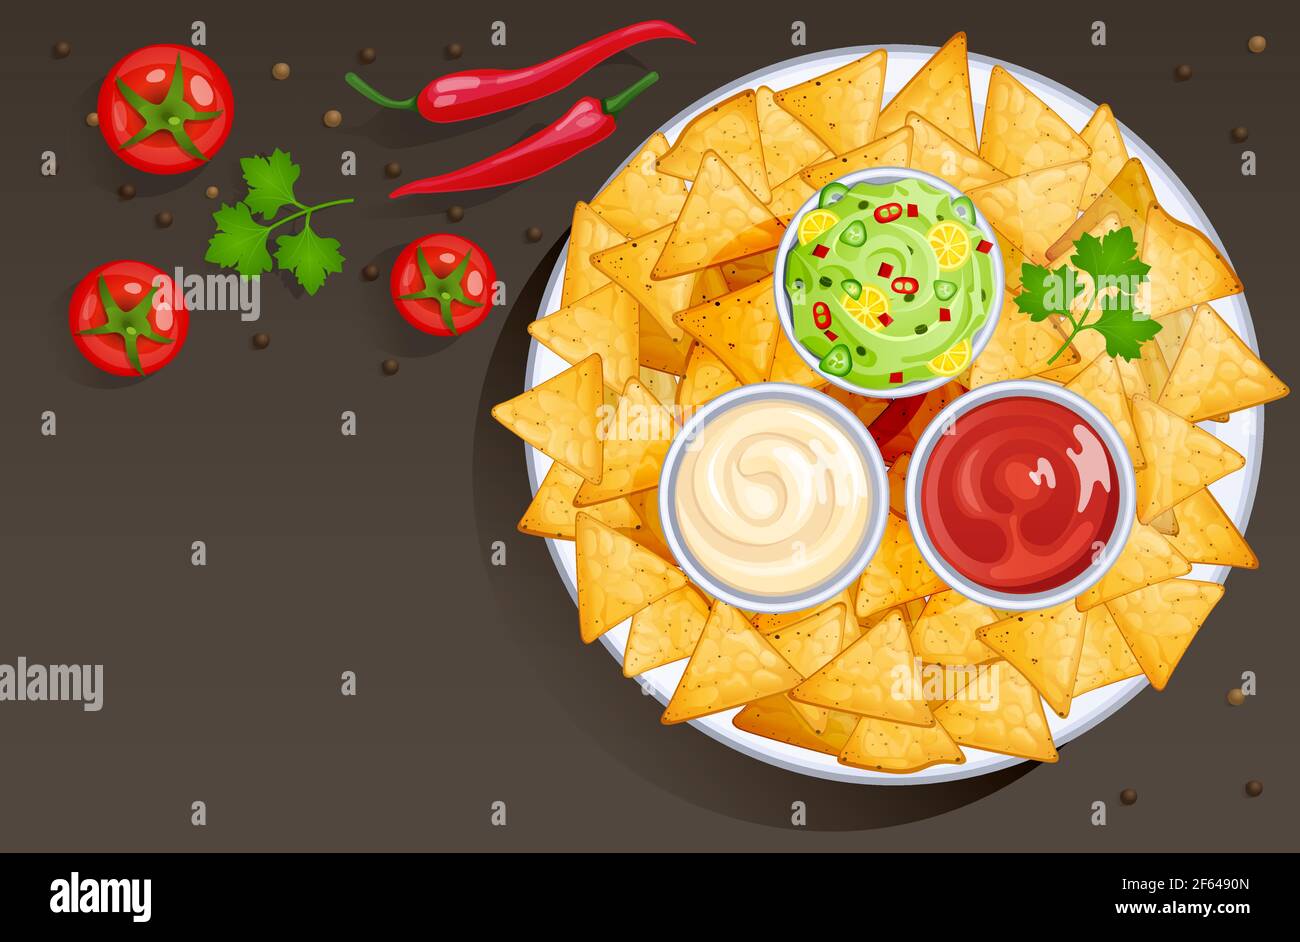 Dish with nacho chips and sauces in bowls, mexican food with dressings. Vector cartoon background with corn tortilla triangle chips on plate with salsa, ketchup, mayonnaise and guacamole Stock Vector